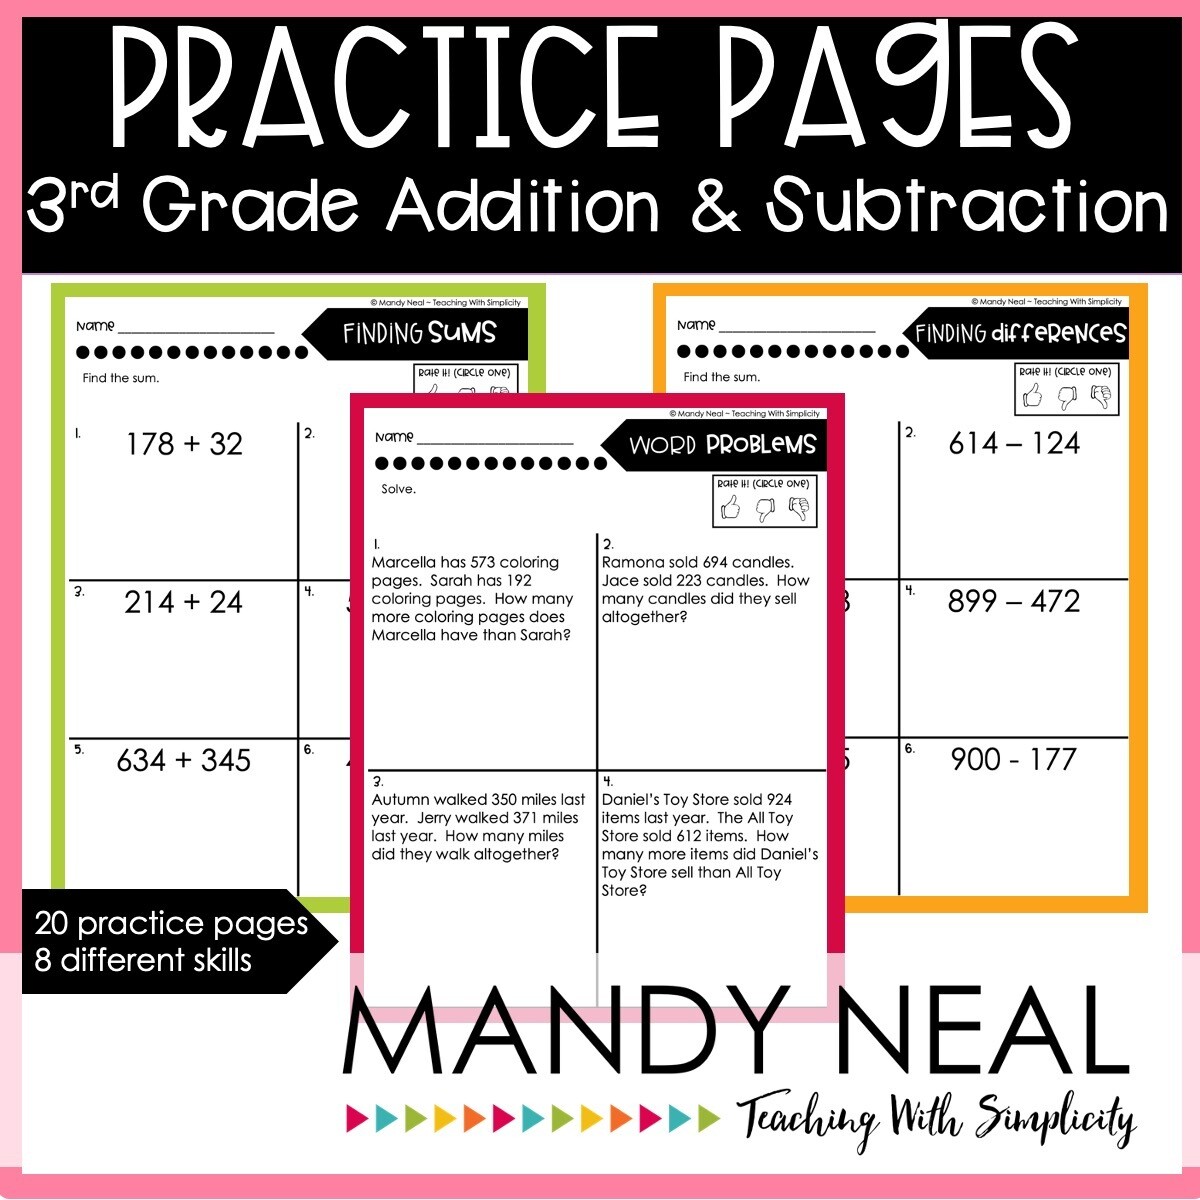 Third Grade Addition & Subtraction Worksheets | Printable